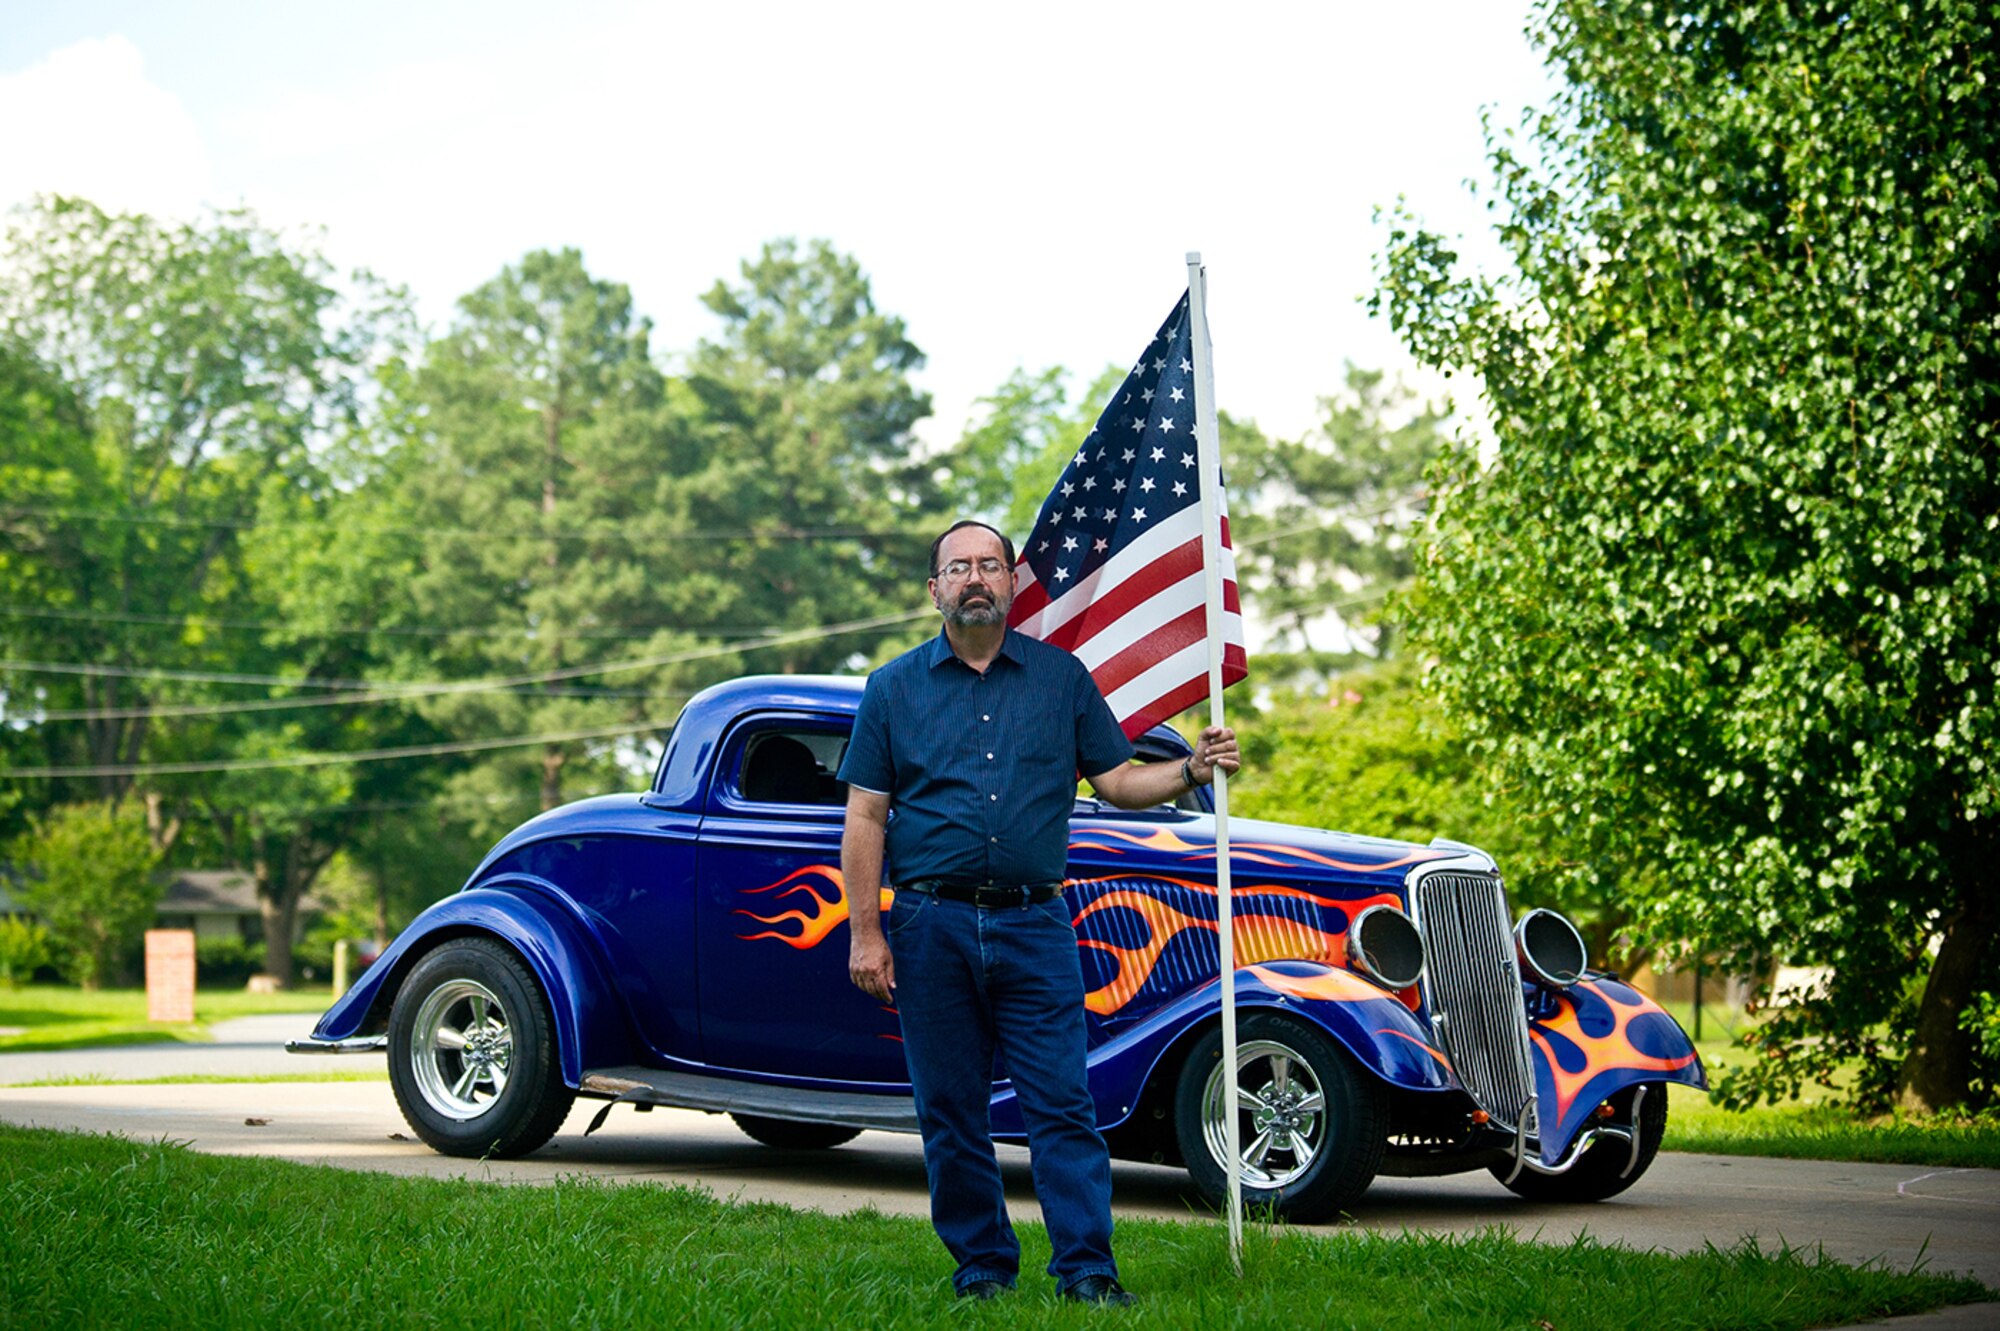 Daniel Wassom, father of Master Sgt. Daniel R. Wassom II, tells stories of spending time rebuilding the 1934 Ford Coupe with his son. (U.S. Air Force photo by Tech. Sgt. Sarayuth Pinthong/ Released)